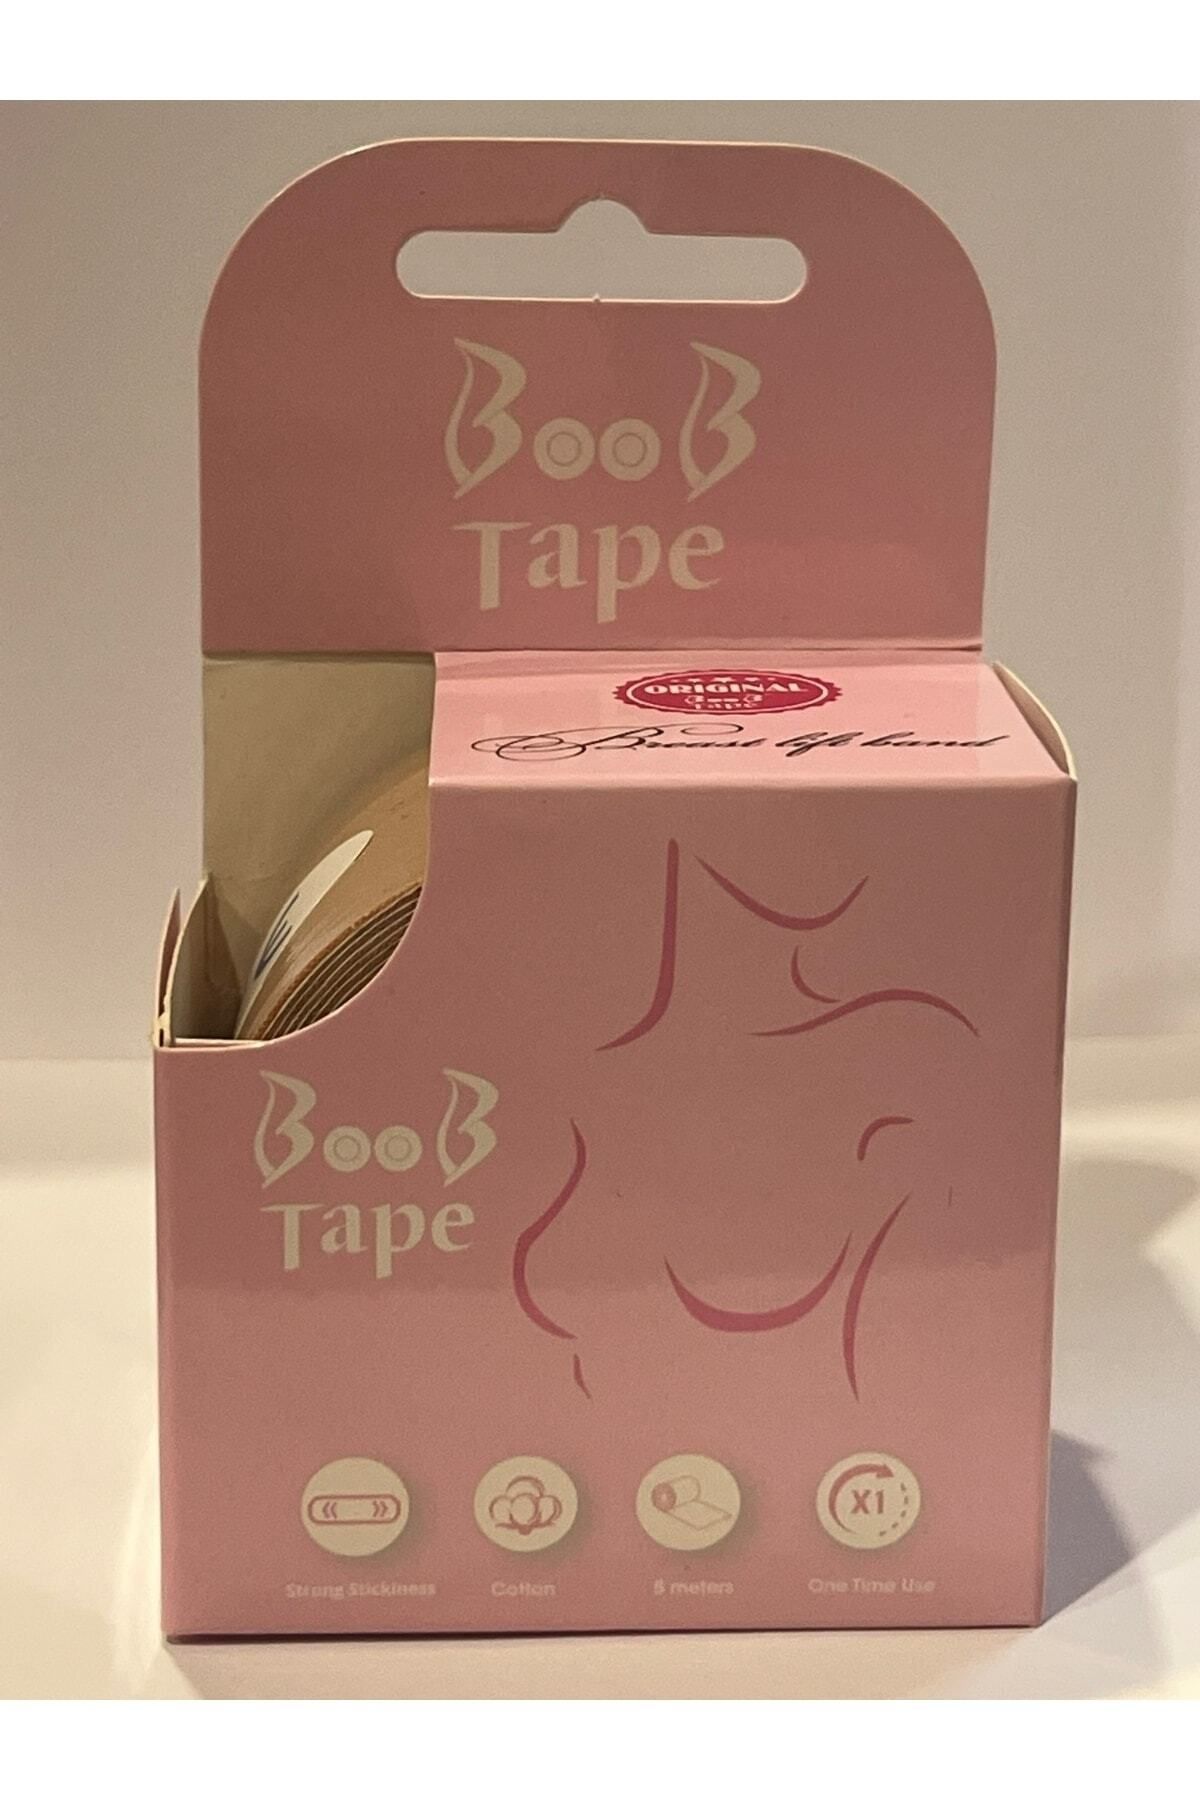 Buy Booby Tape - The Original Breast Tape Brown by Booby Tape at